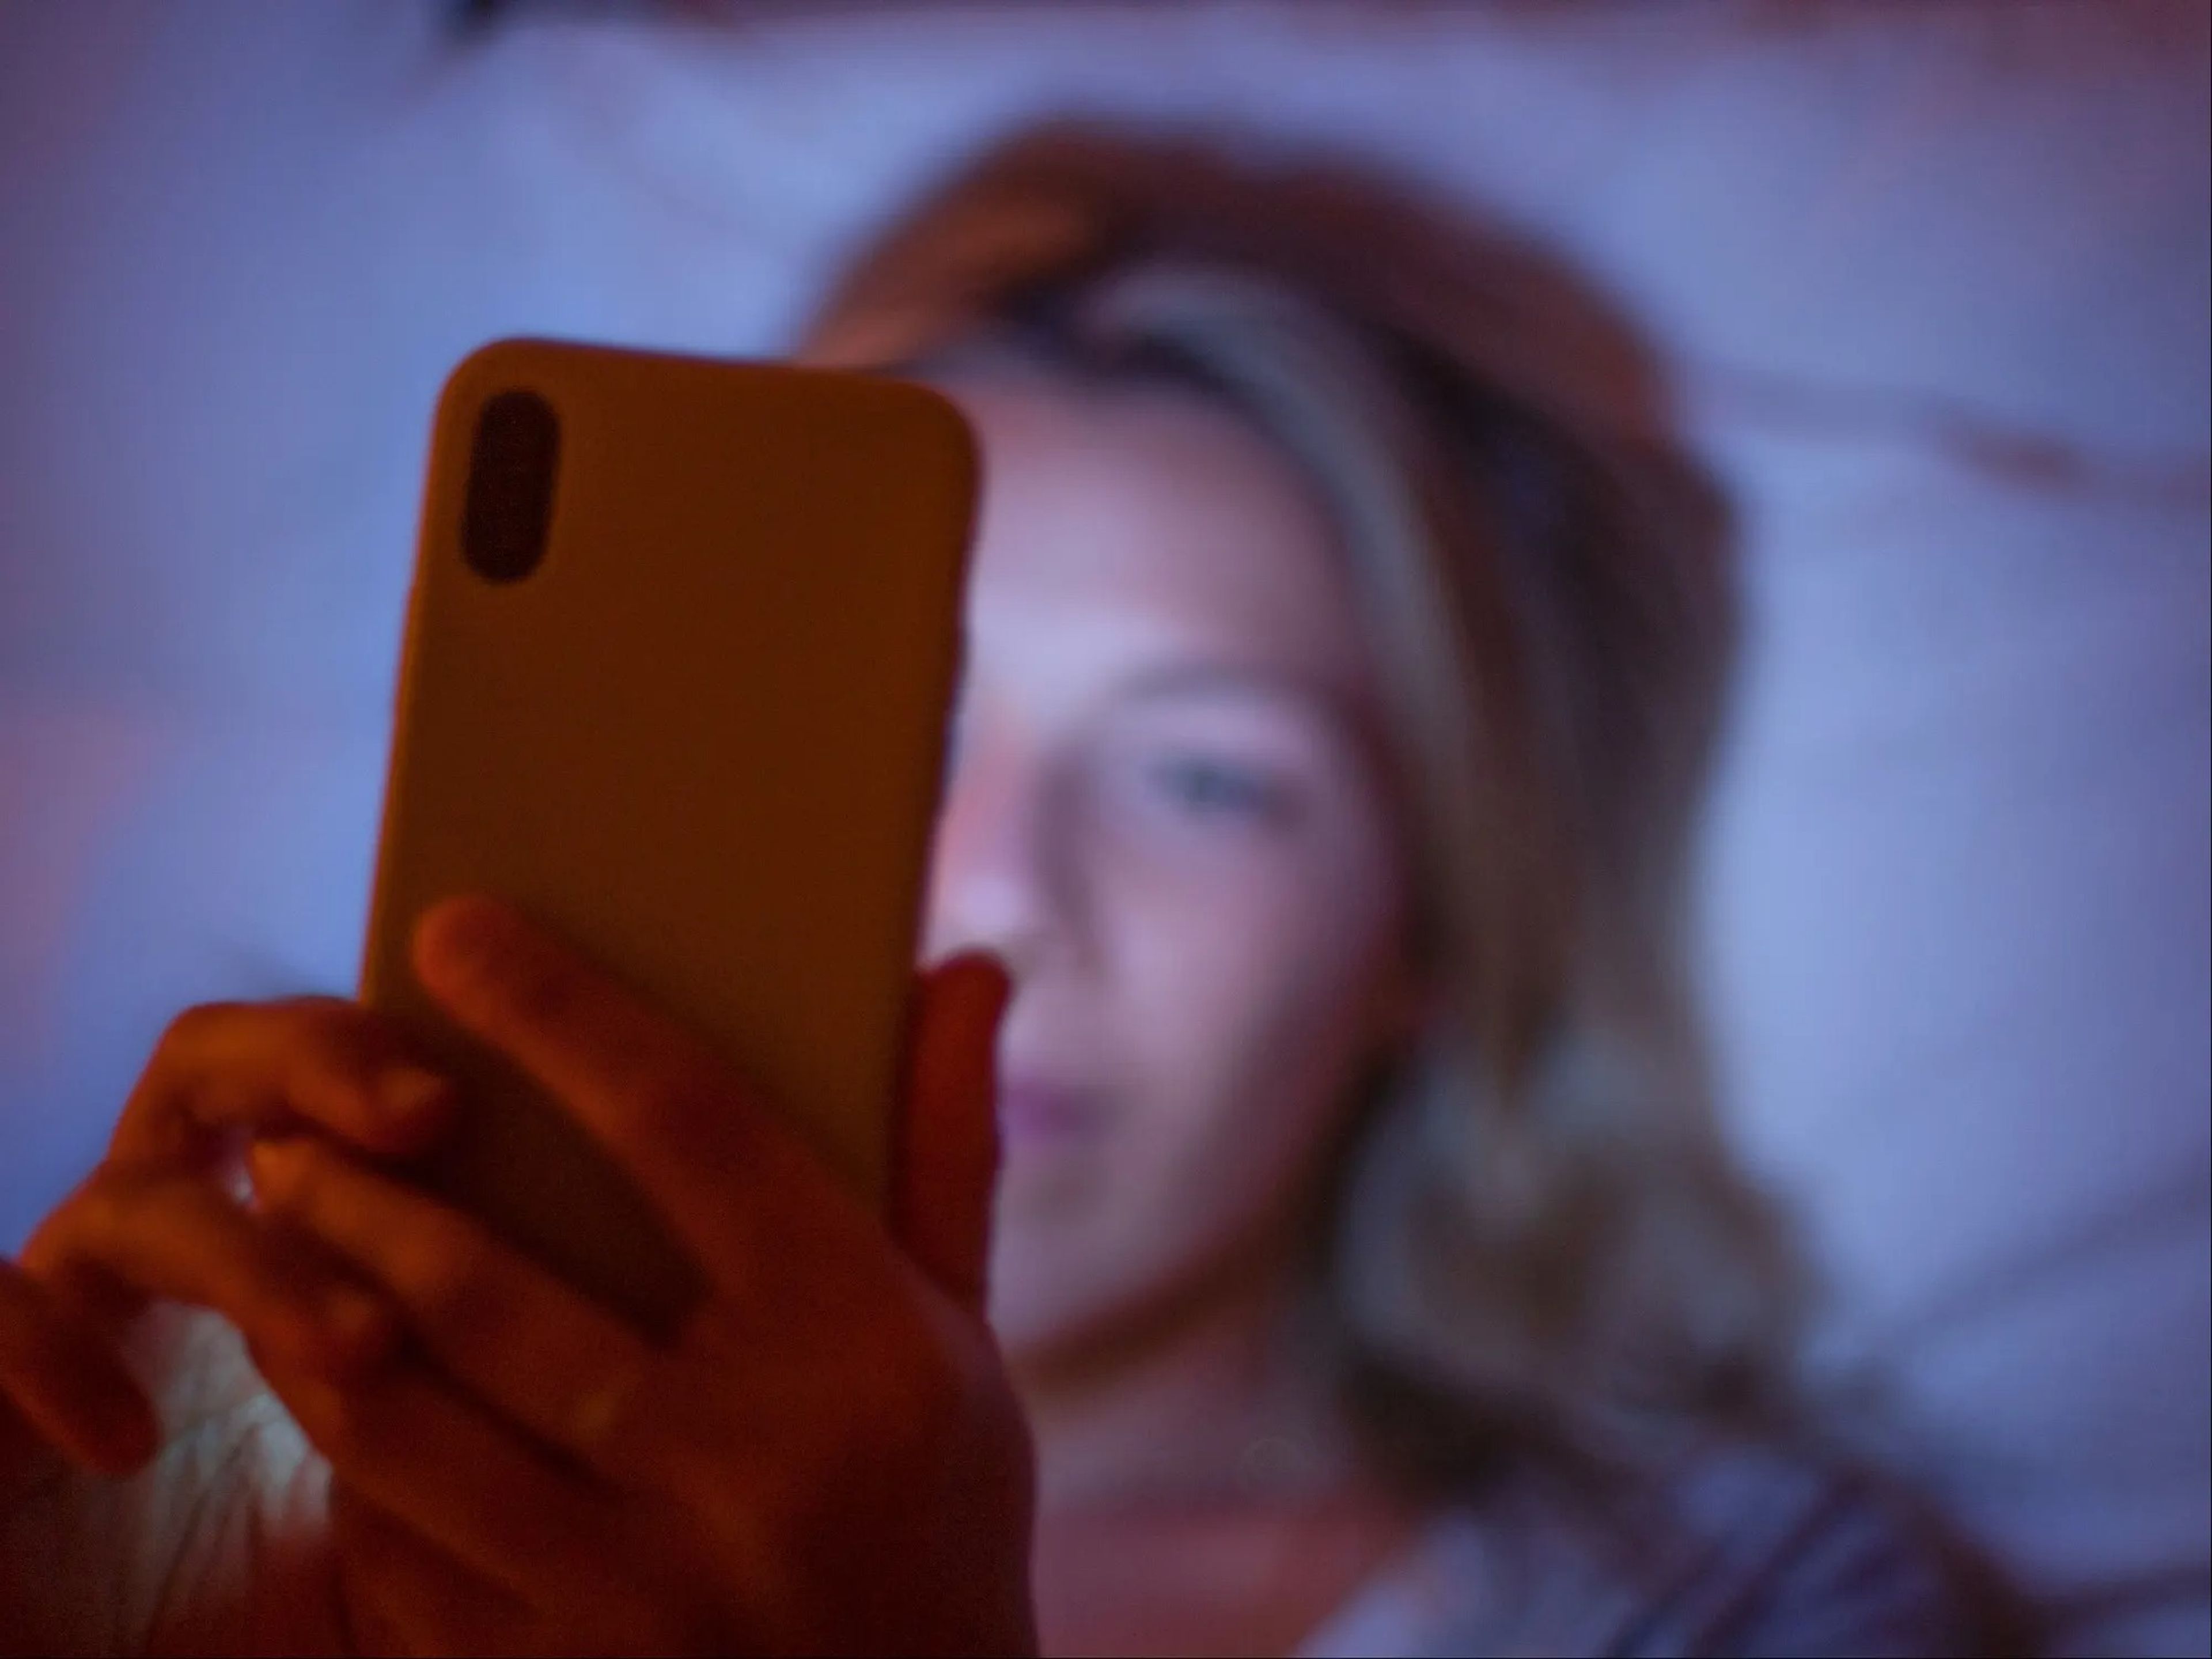 Young woman on phone at night